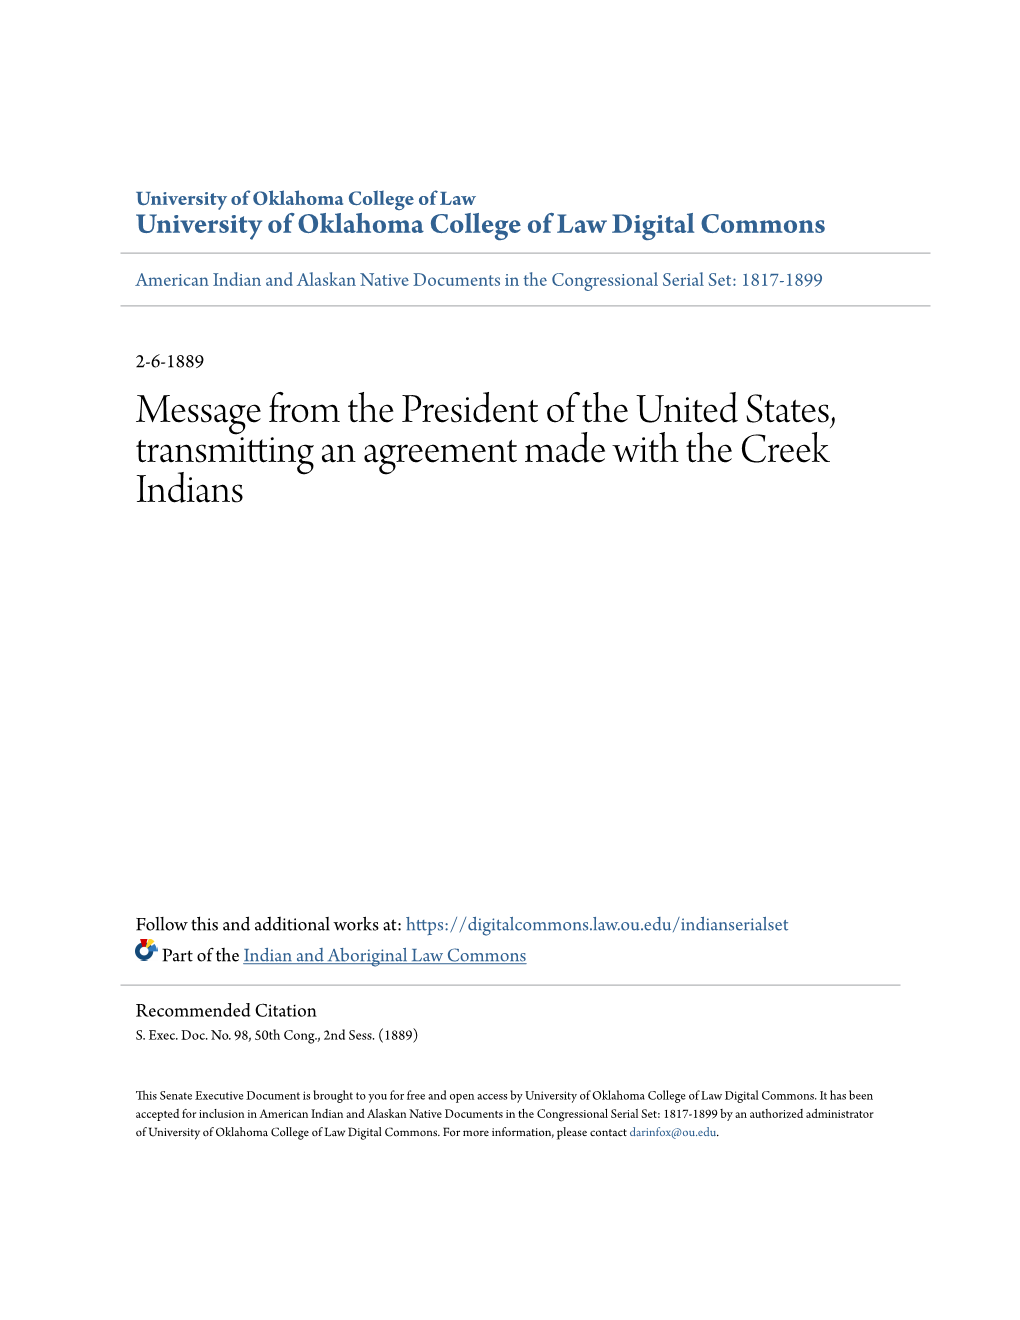 Message from the President of the United States, Transmitting an Agreement Made with the Creek Indians